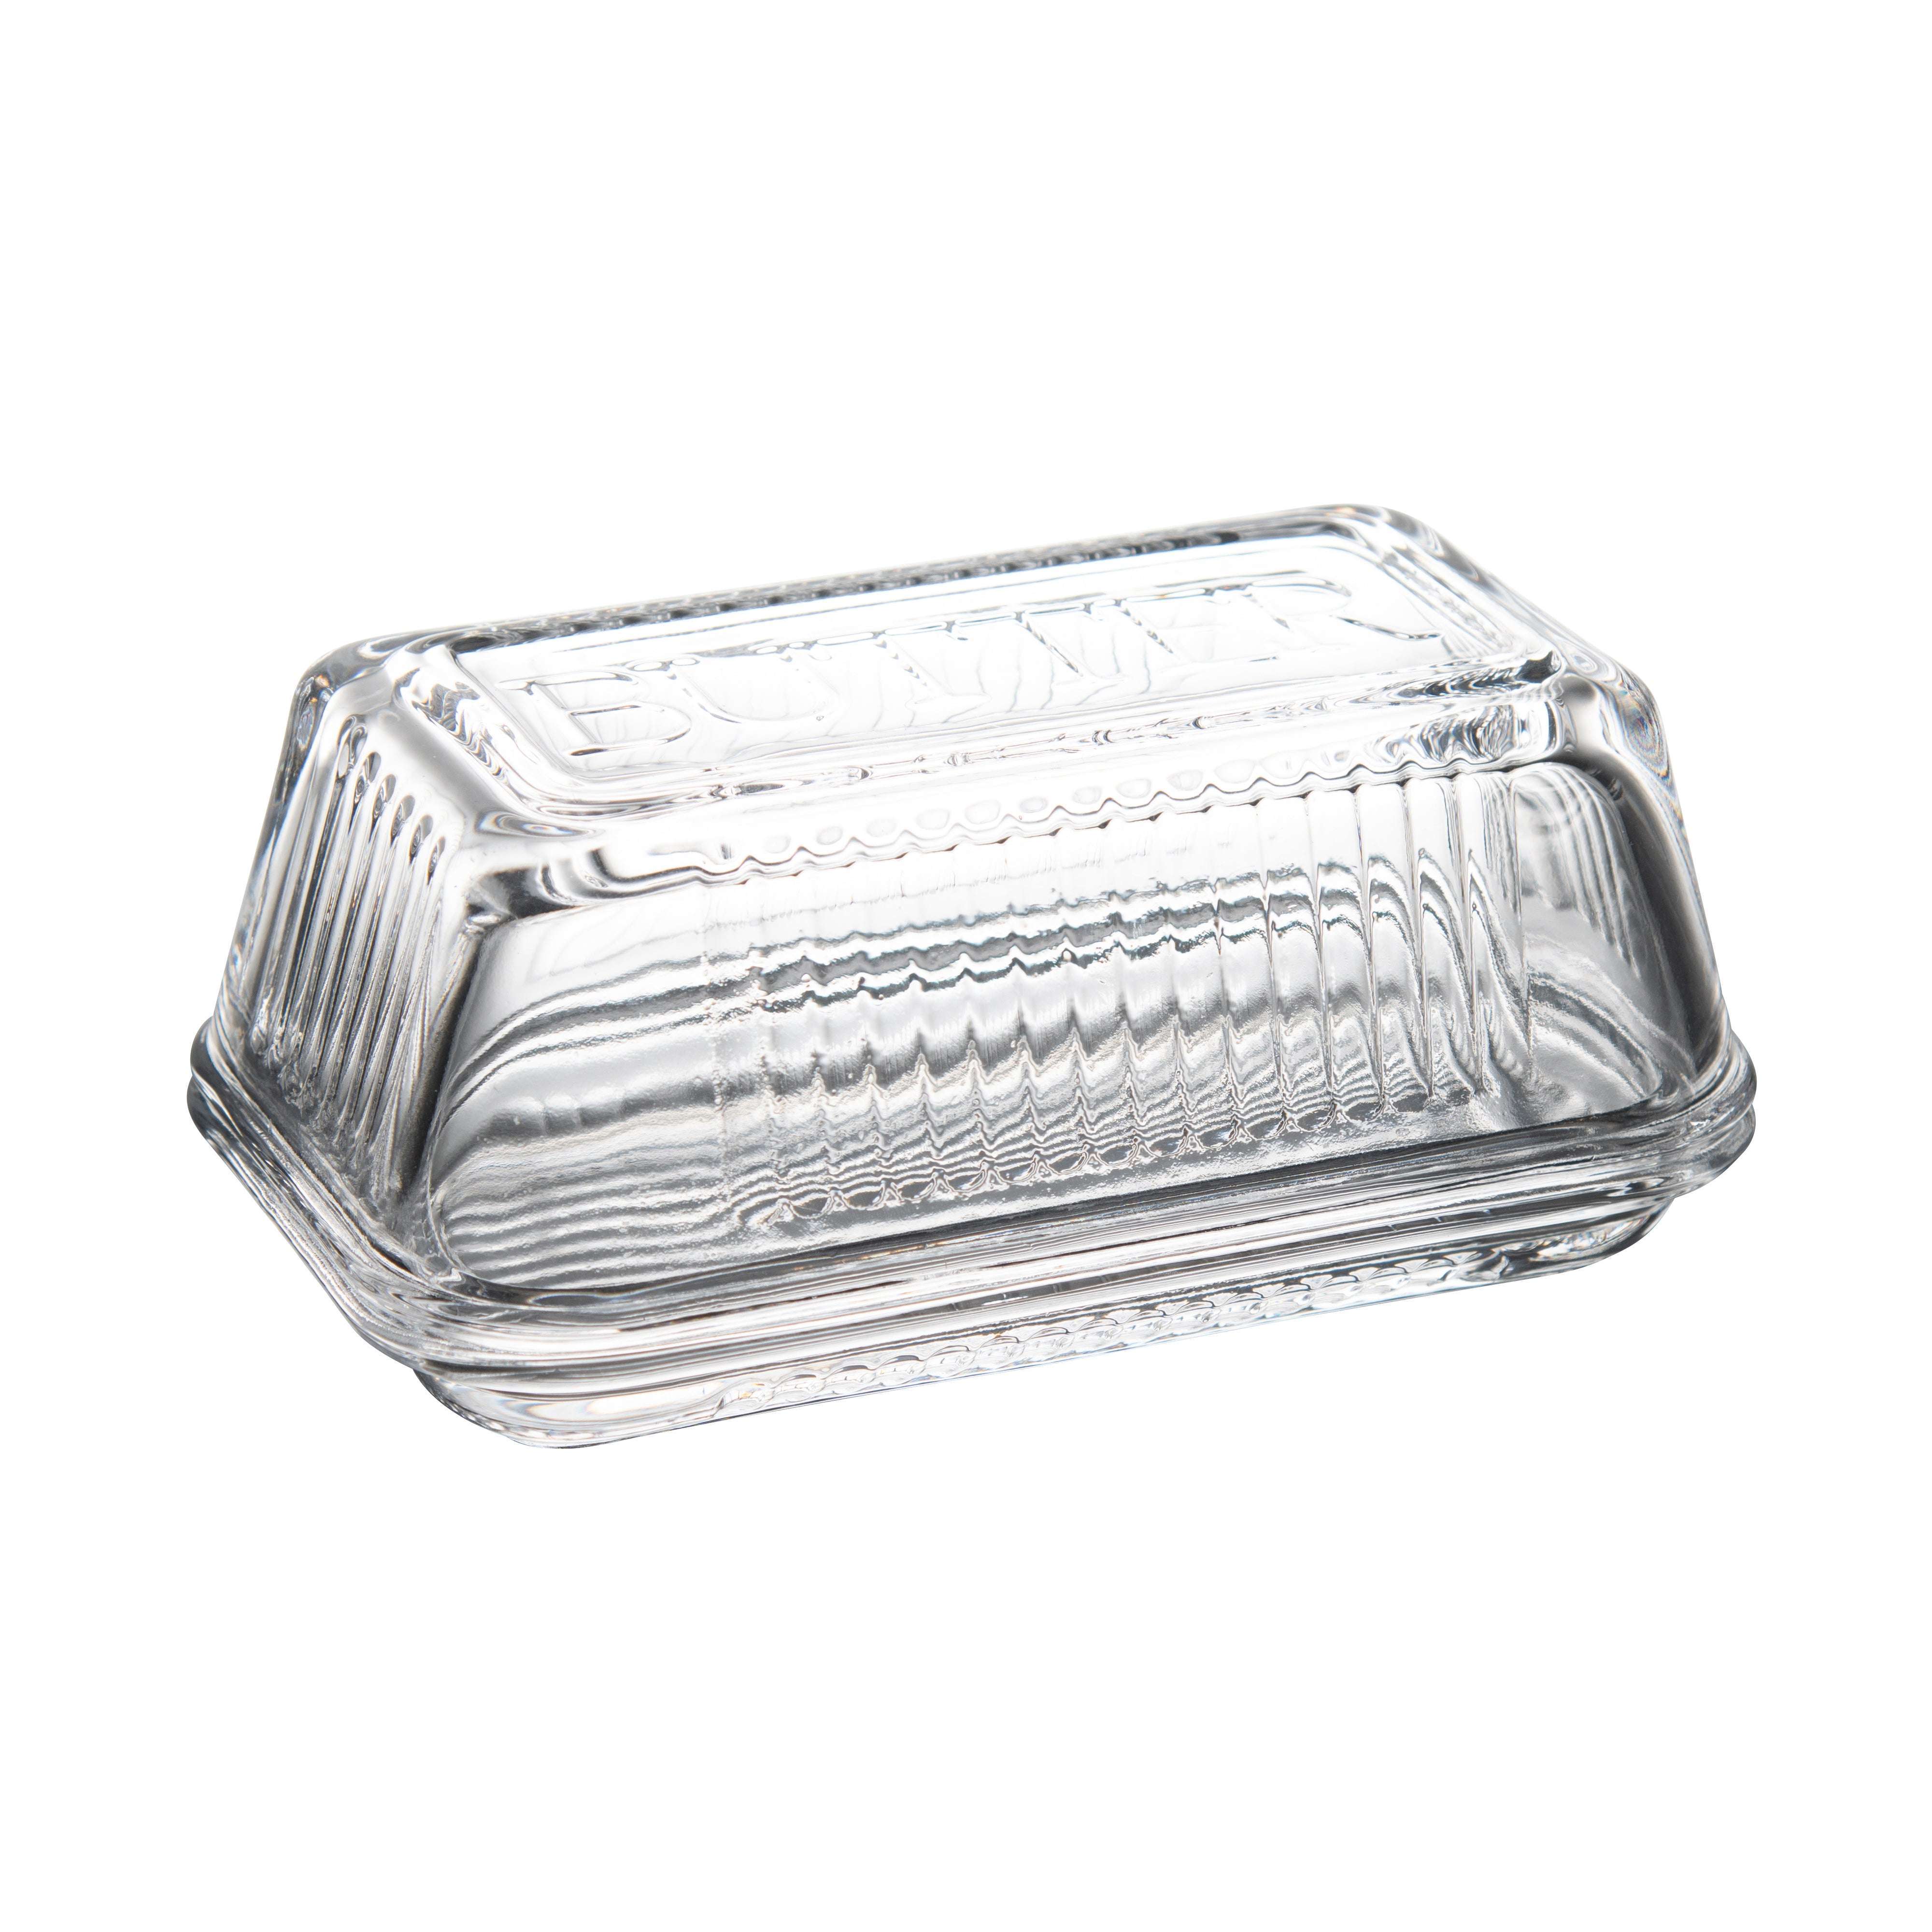 Impodimo Living & Giving:Reece Clear Butter Dish:Swing Gifts